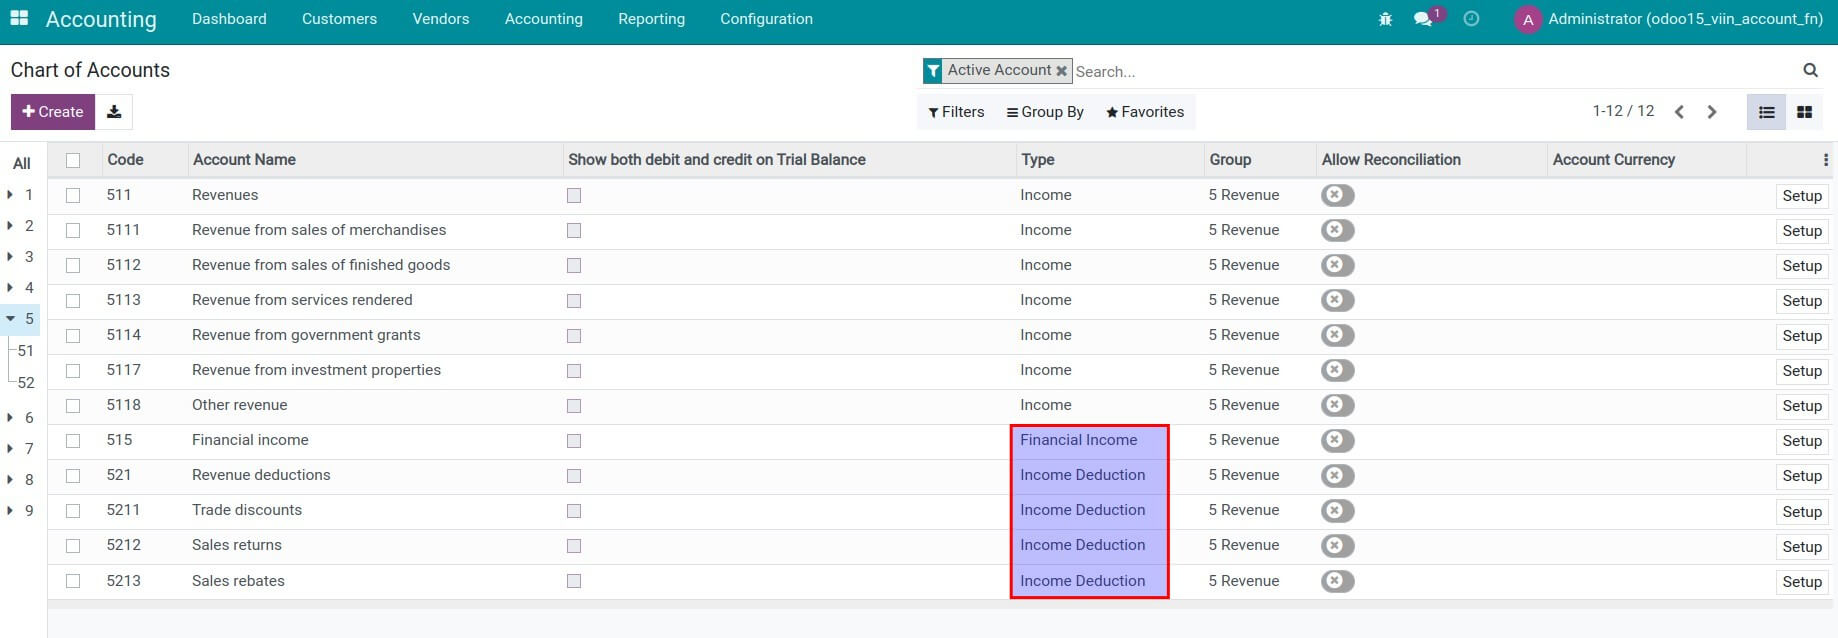 New account types for financial reports in Viindoo